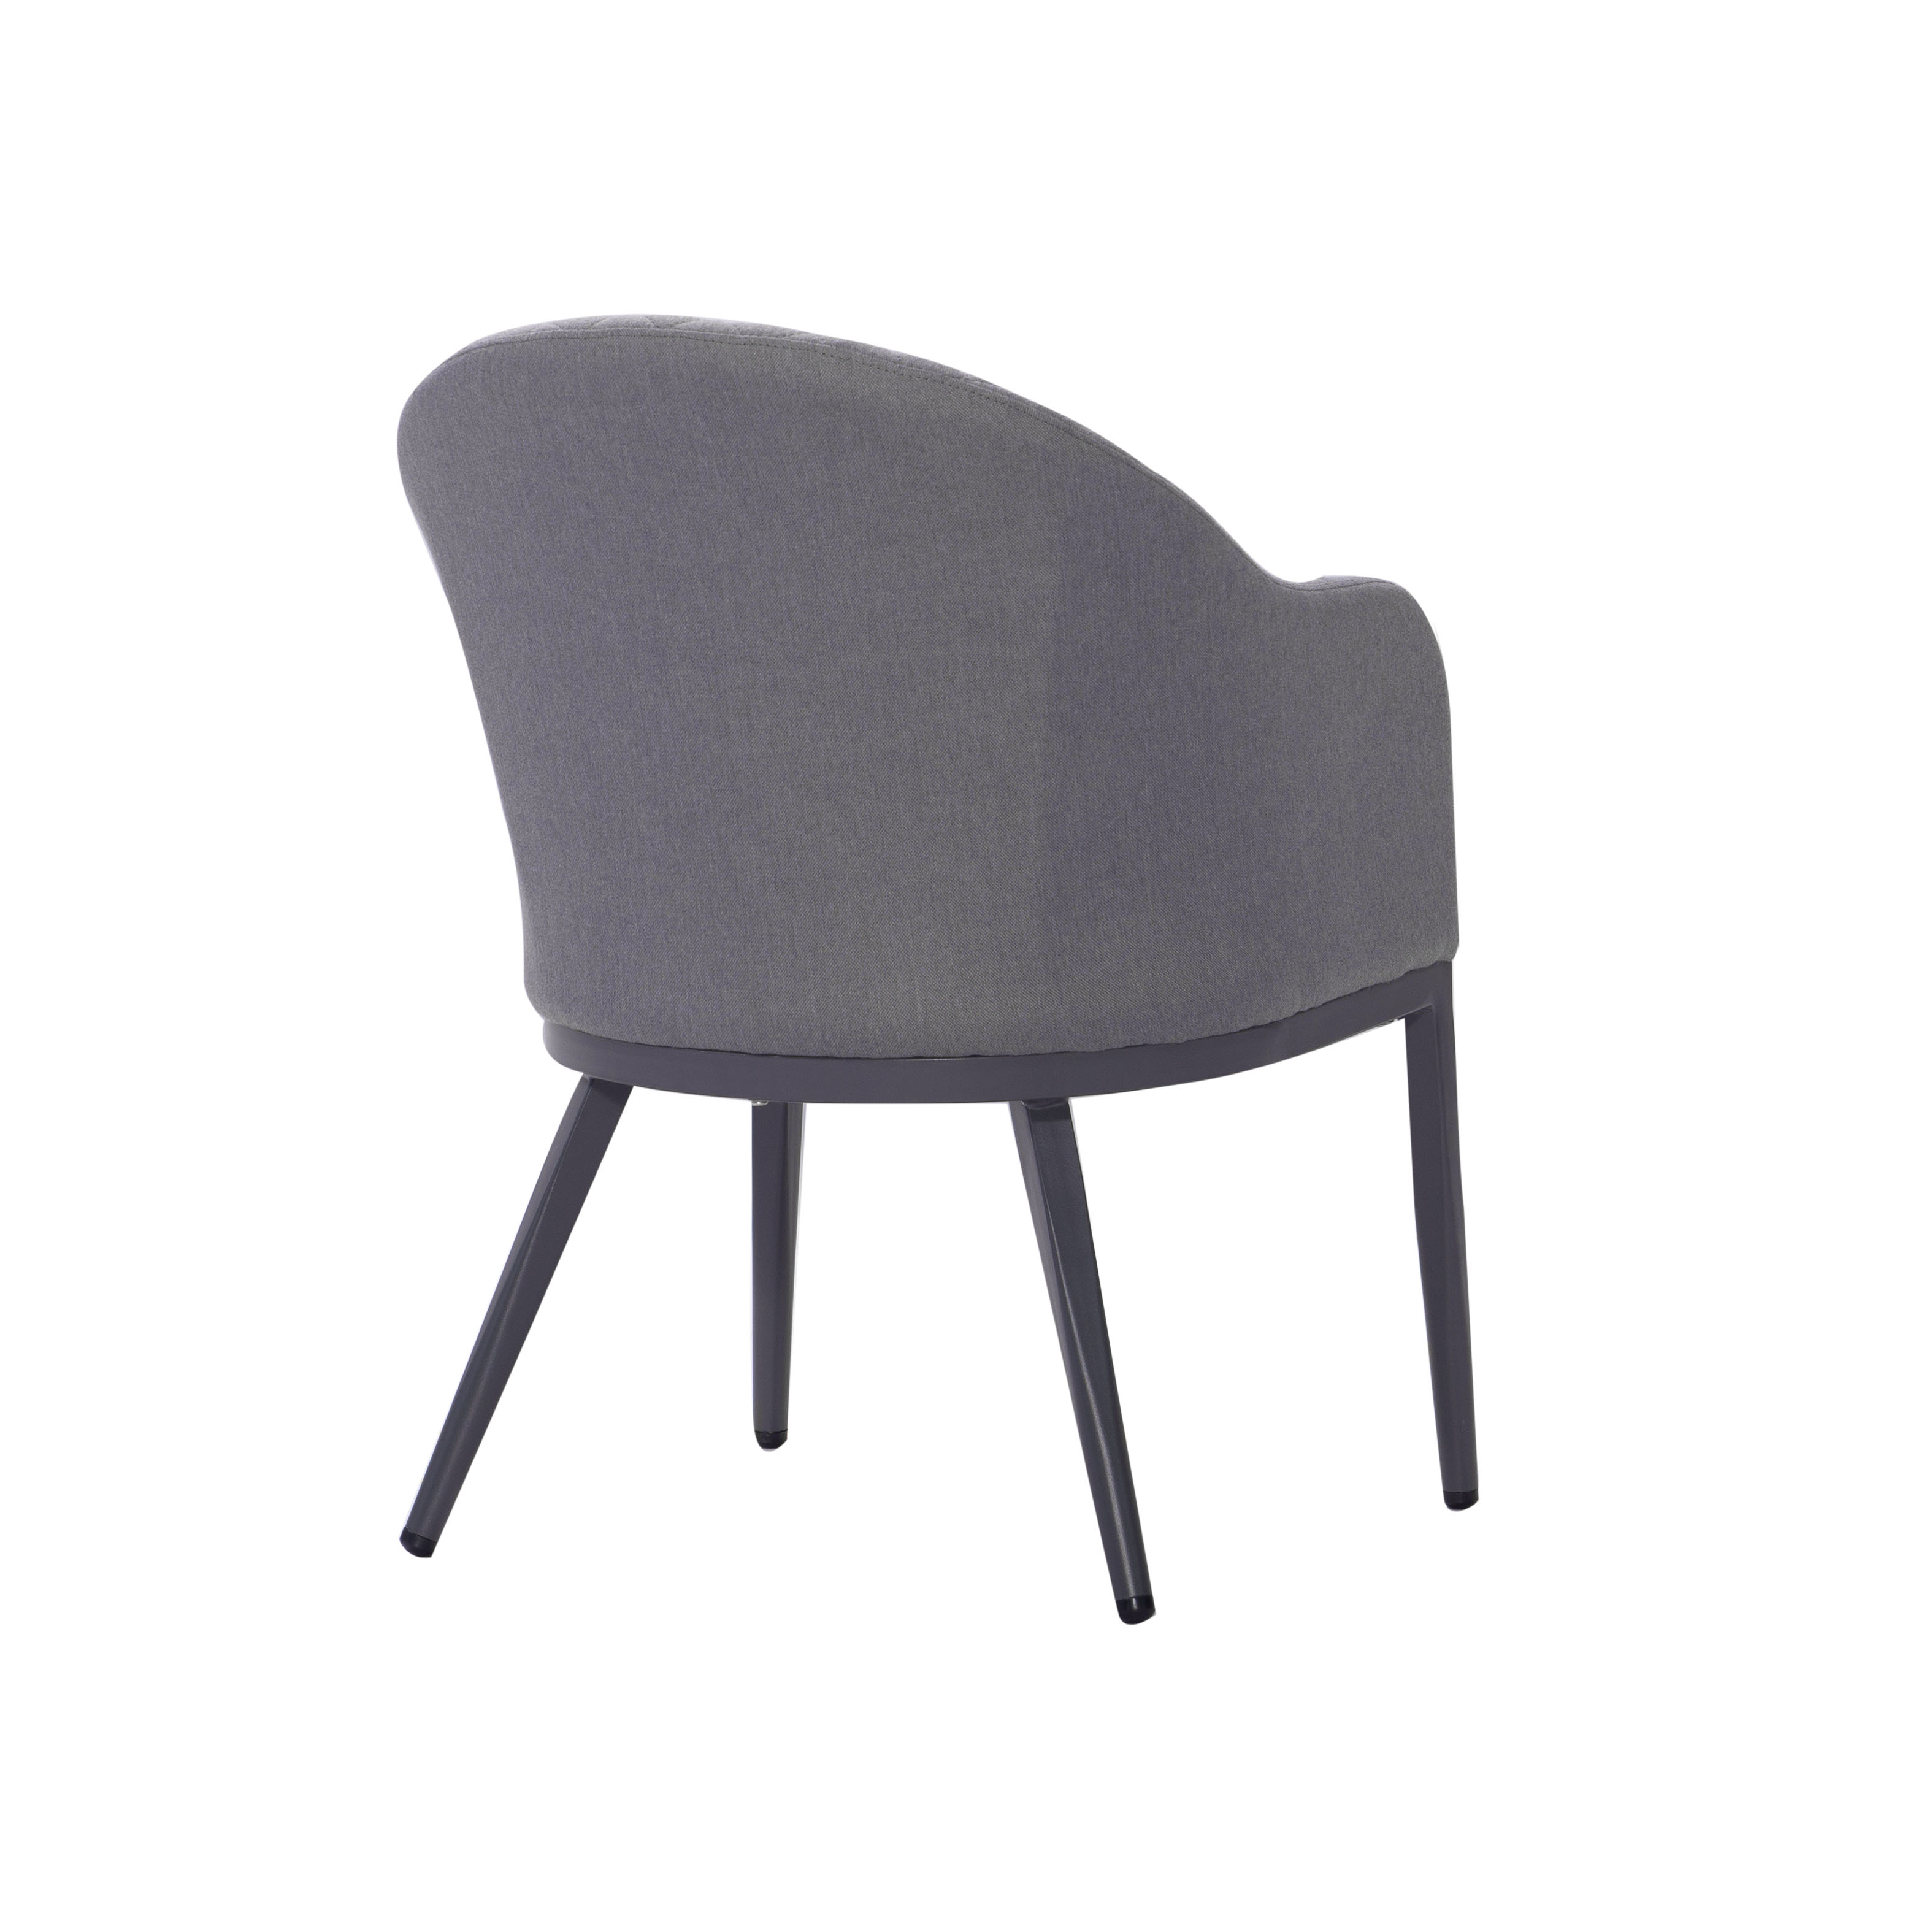 Legend dining chair S2